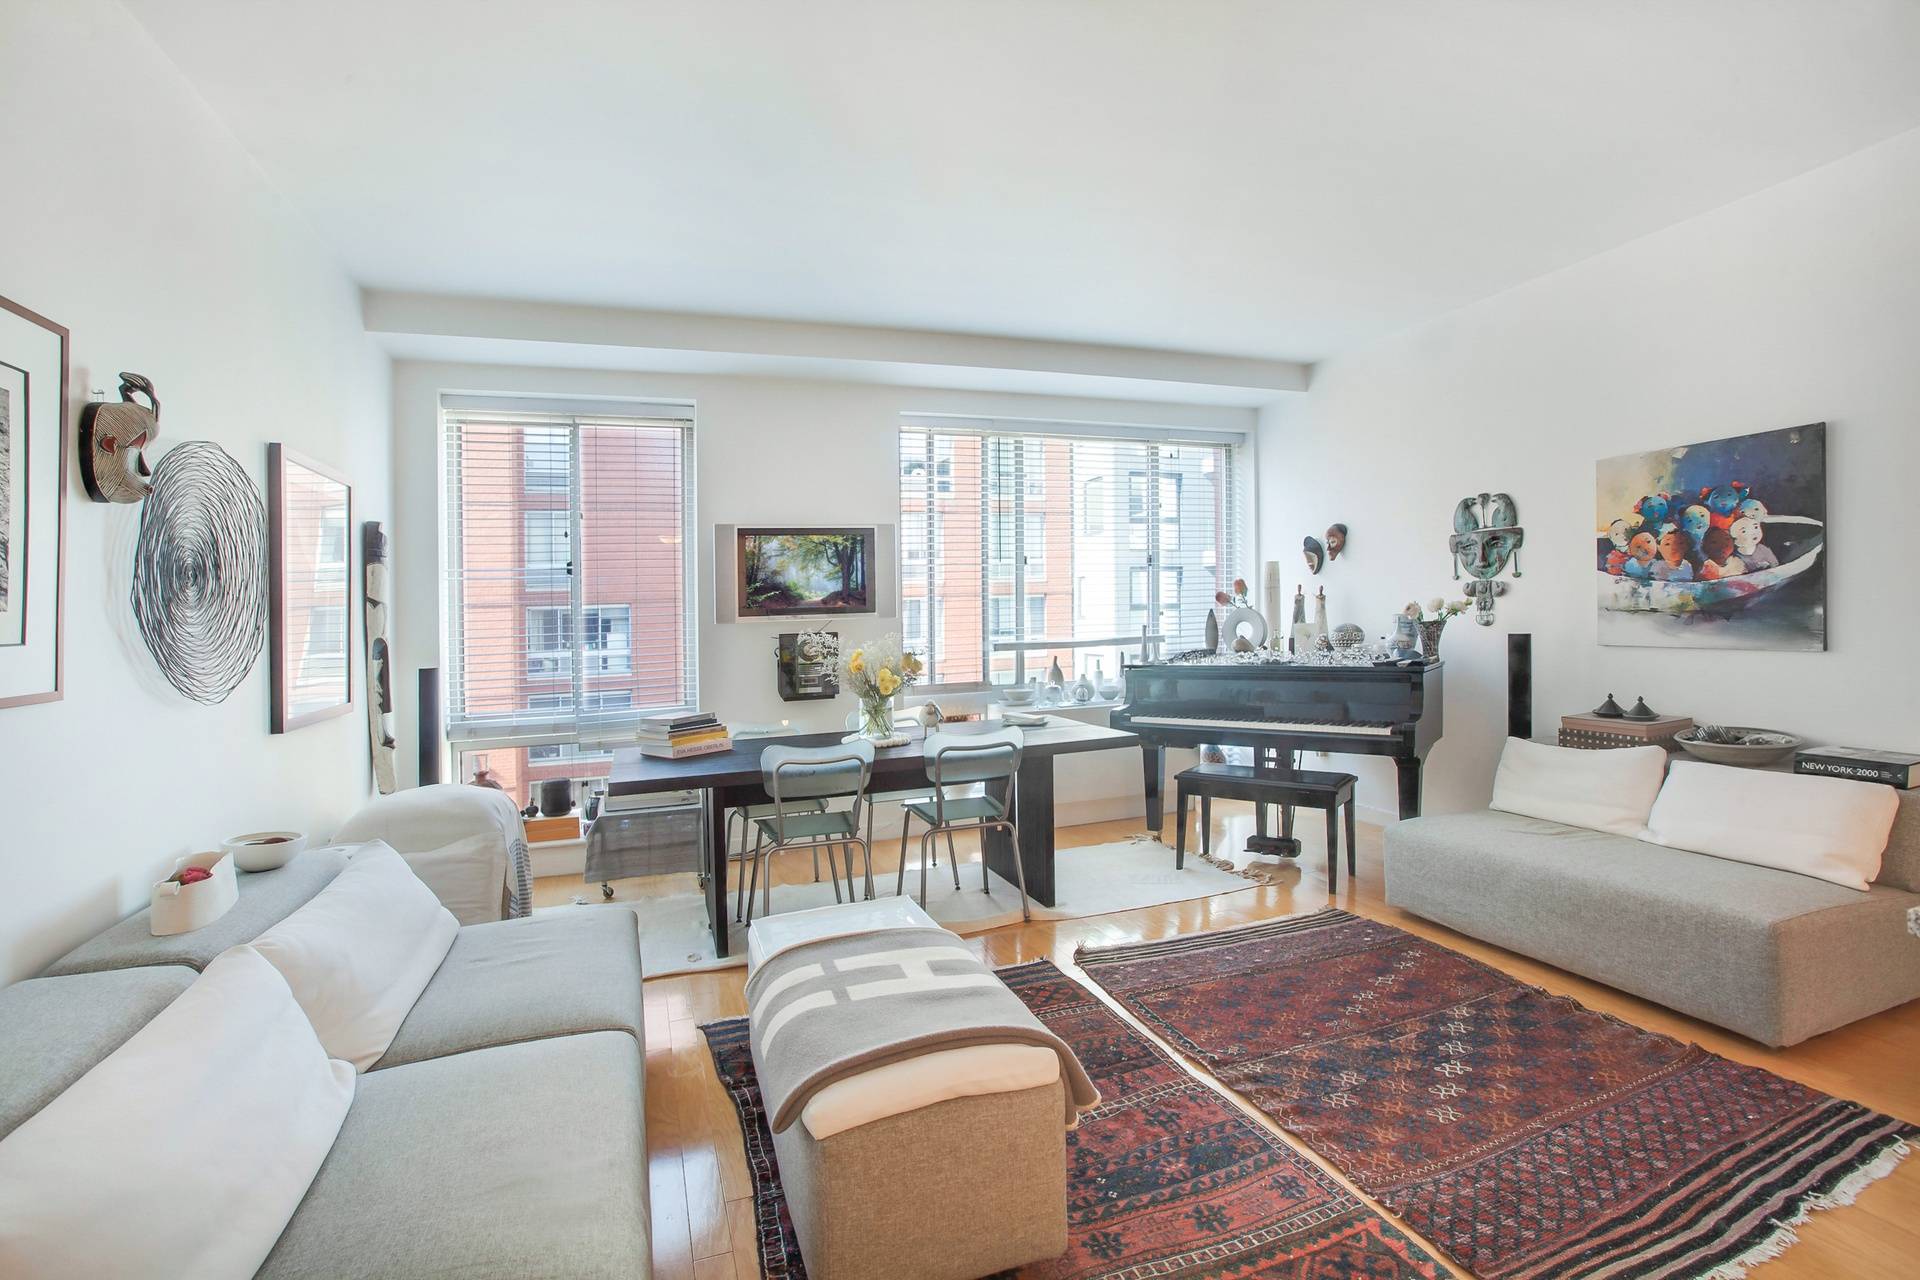 NEW TO MARKET !! STUNNING, MODERN 2 BED/ 2 BATH with WATER VIEW in WEST CHELSEA !!